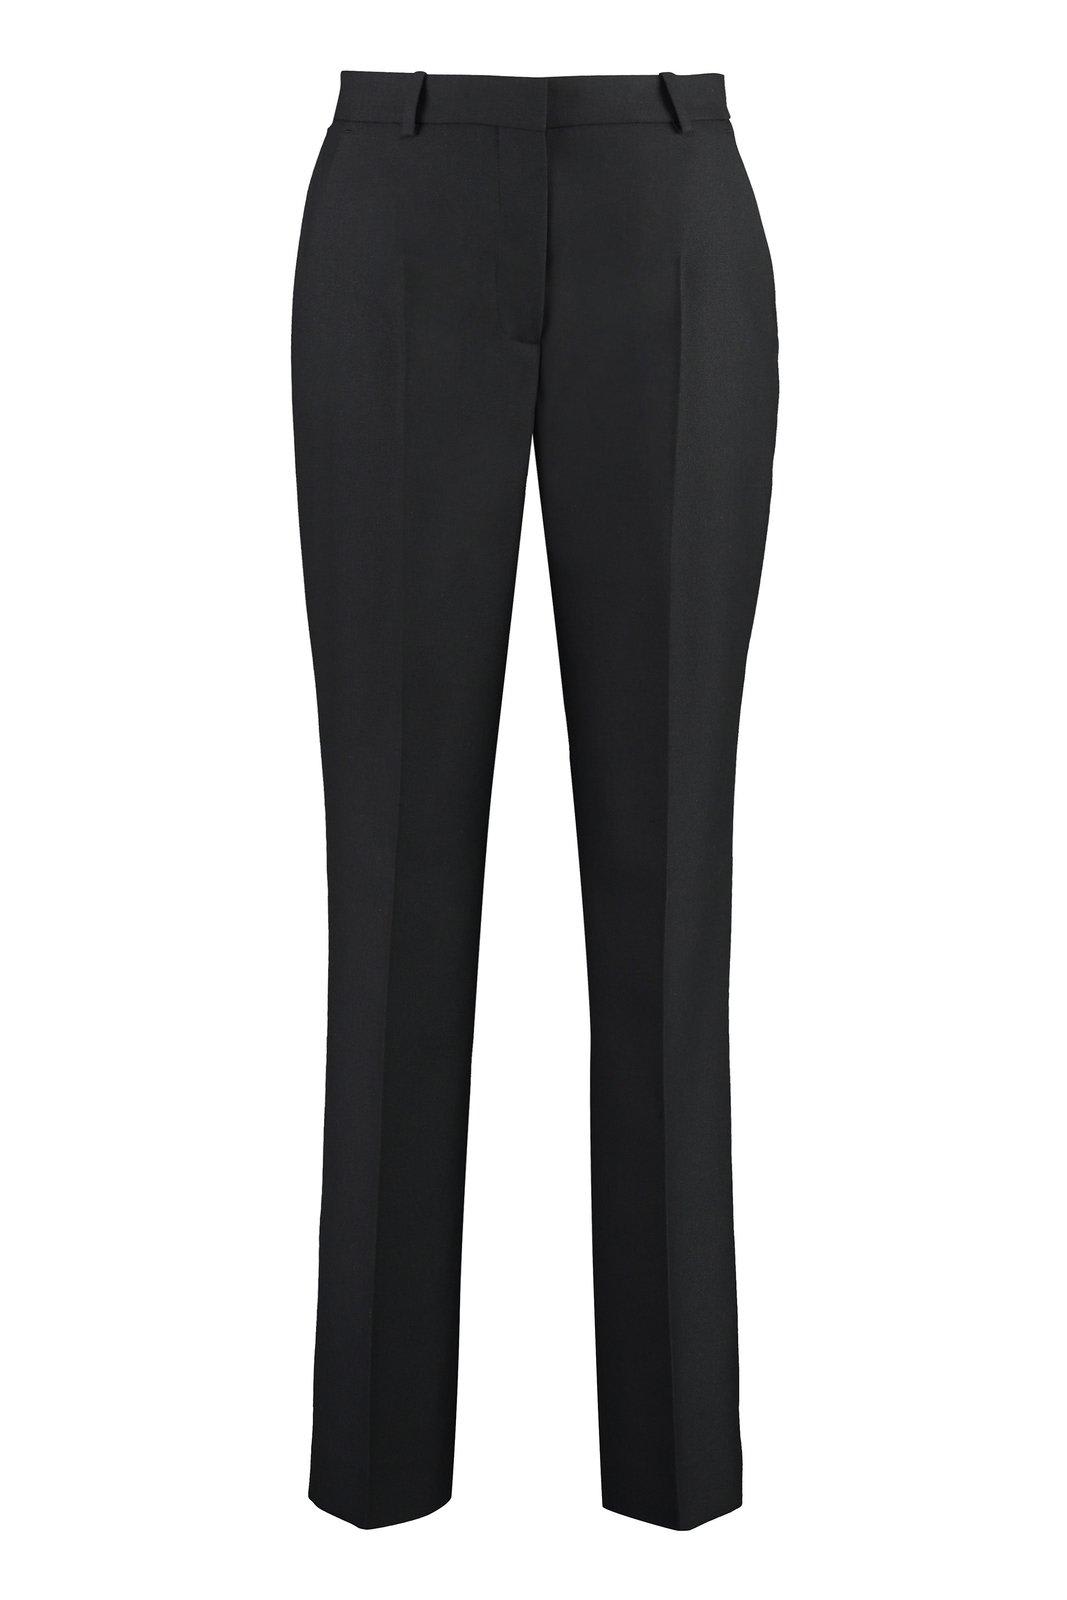 Shop Calvin Klein Pleat Tailored Trousers In Black